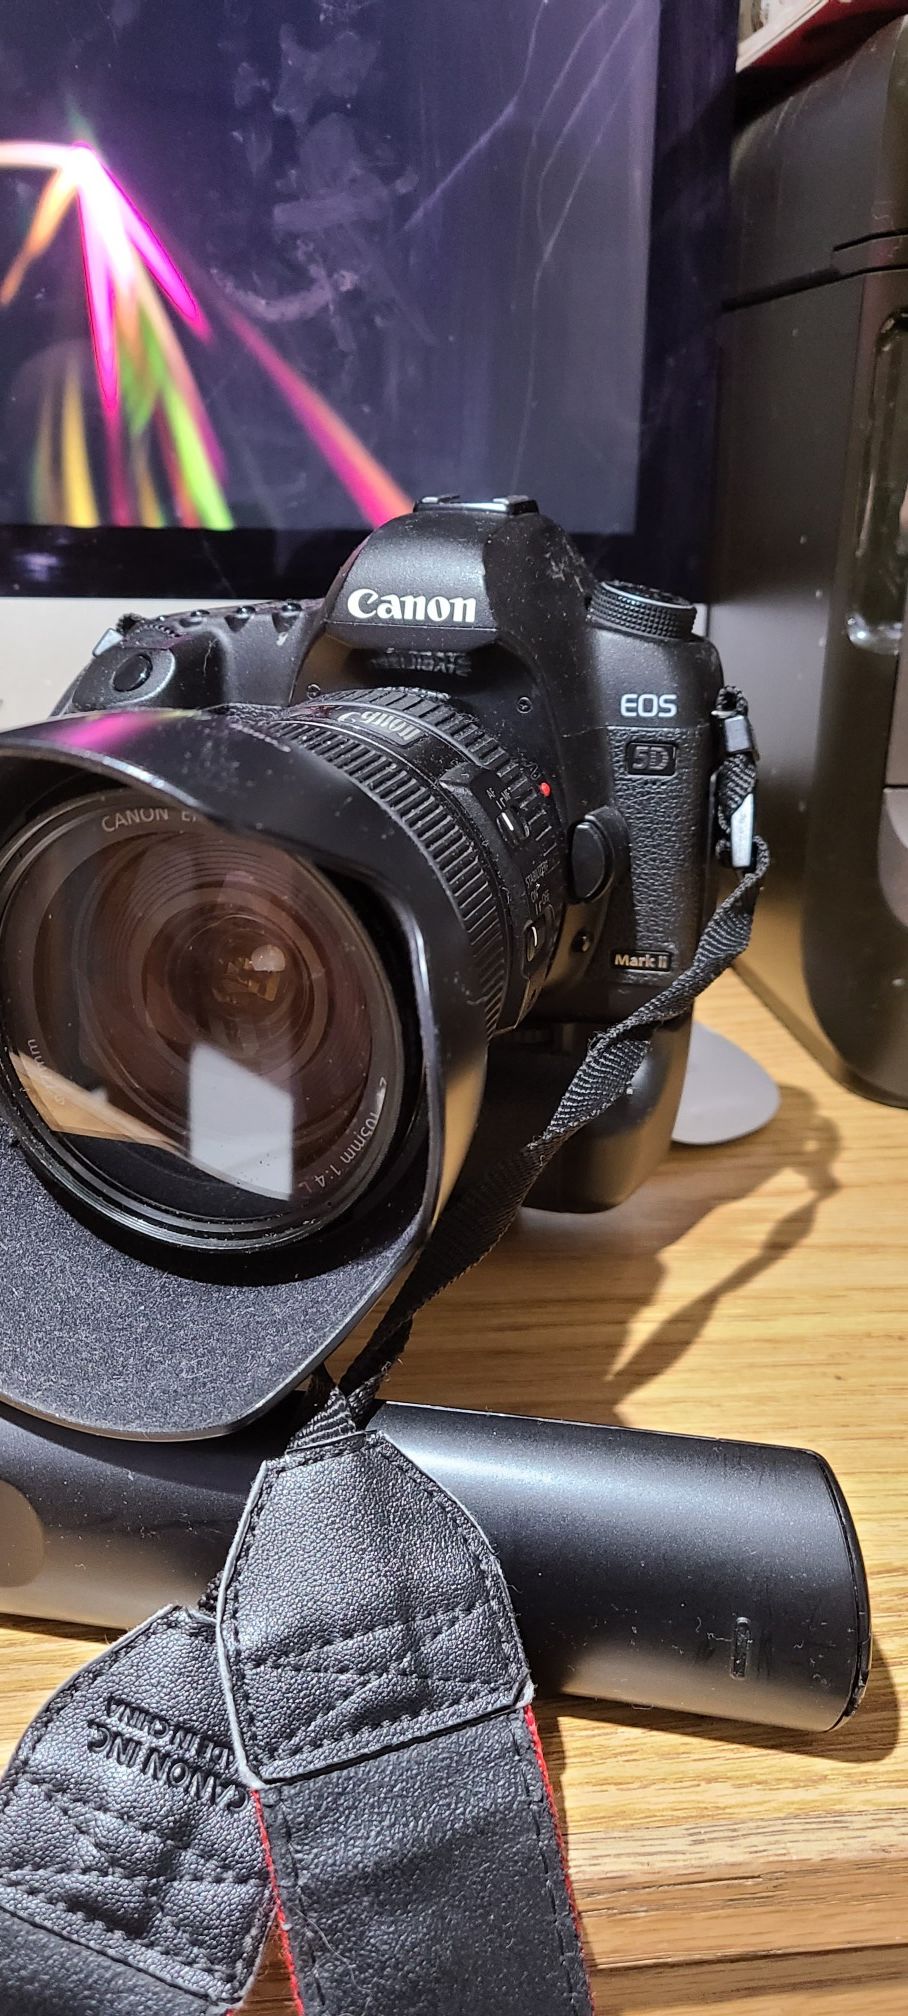 Used Canon 5d n 24-105mm L lens $700